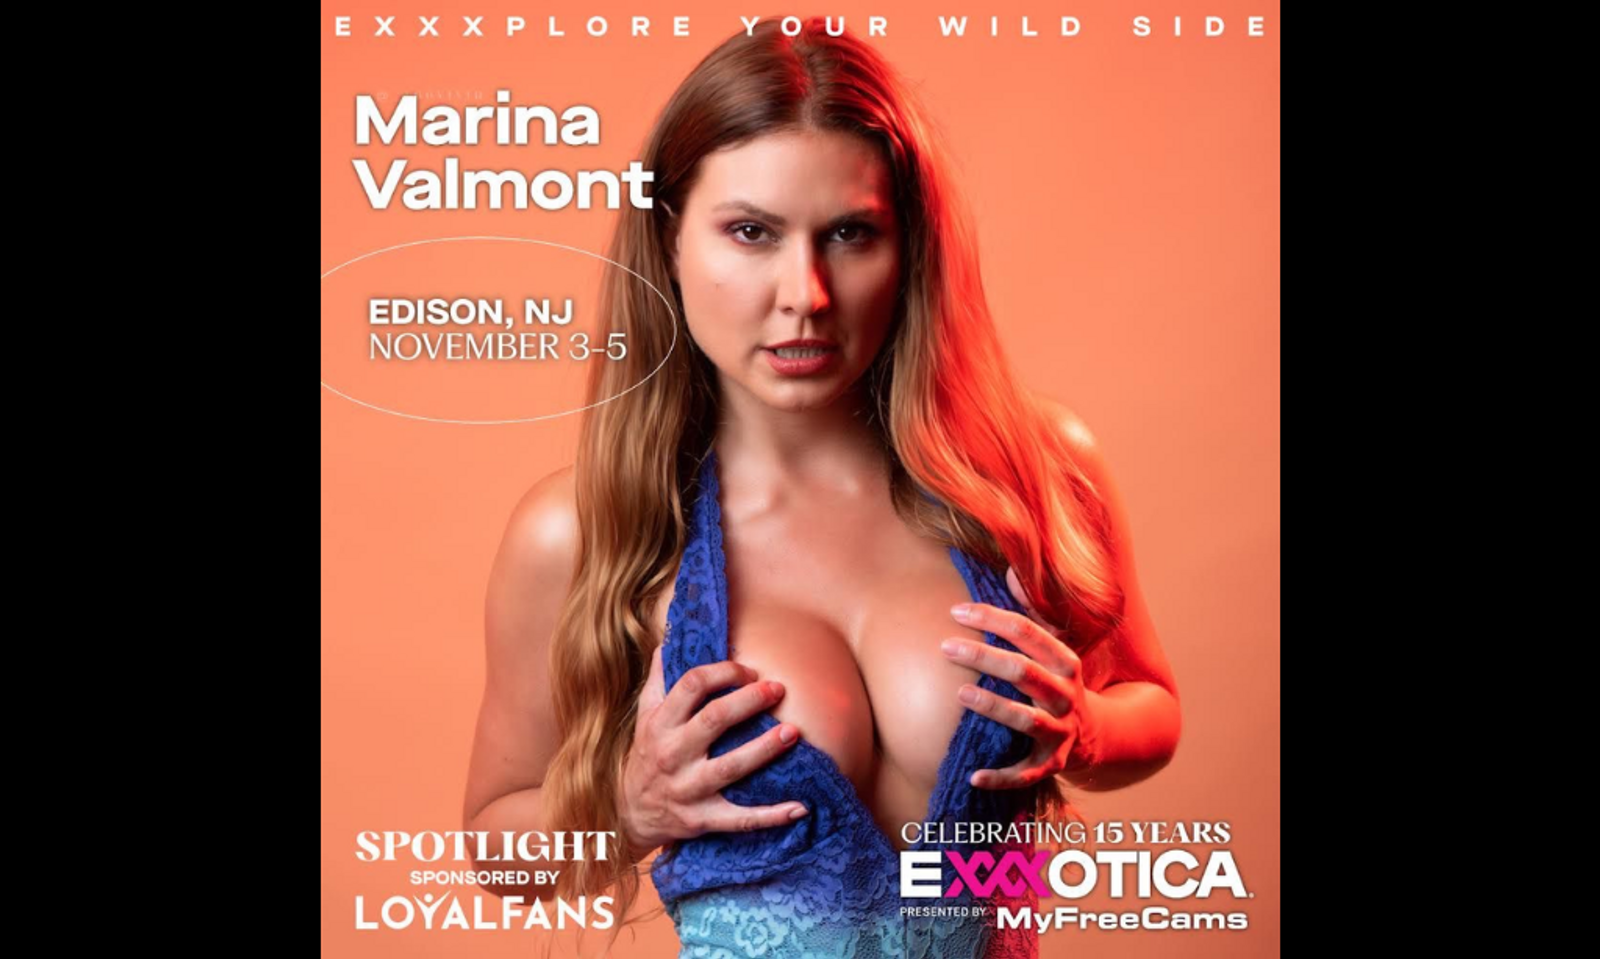 Marina Valmont Ready to Greet Fans at Exxxotica New Jersey